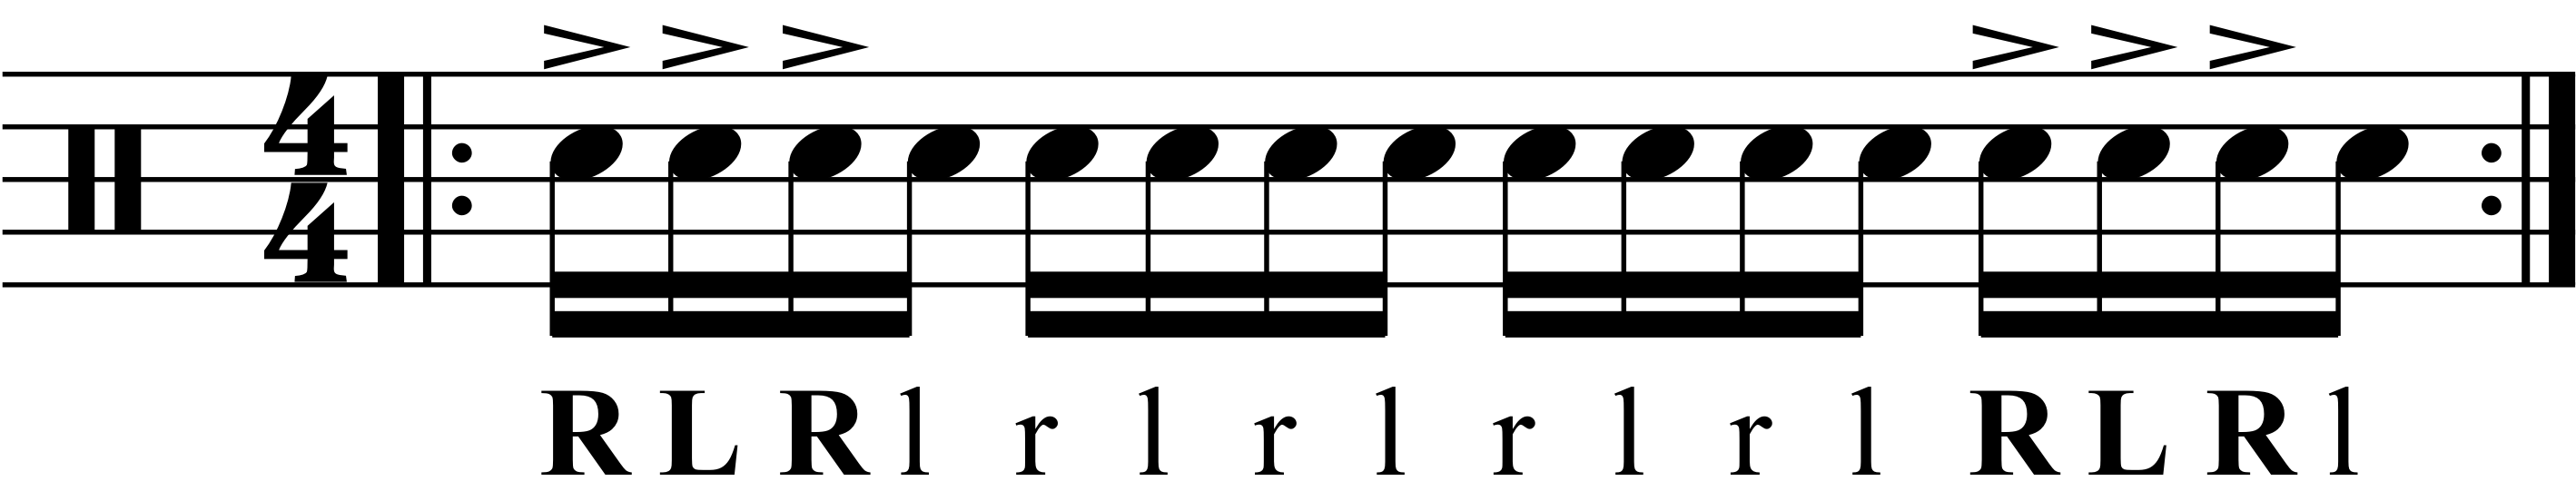 Accenting left hand strokes in a single stroke roll